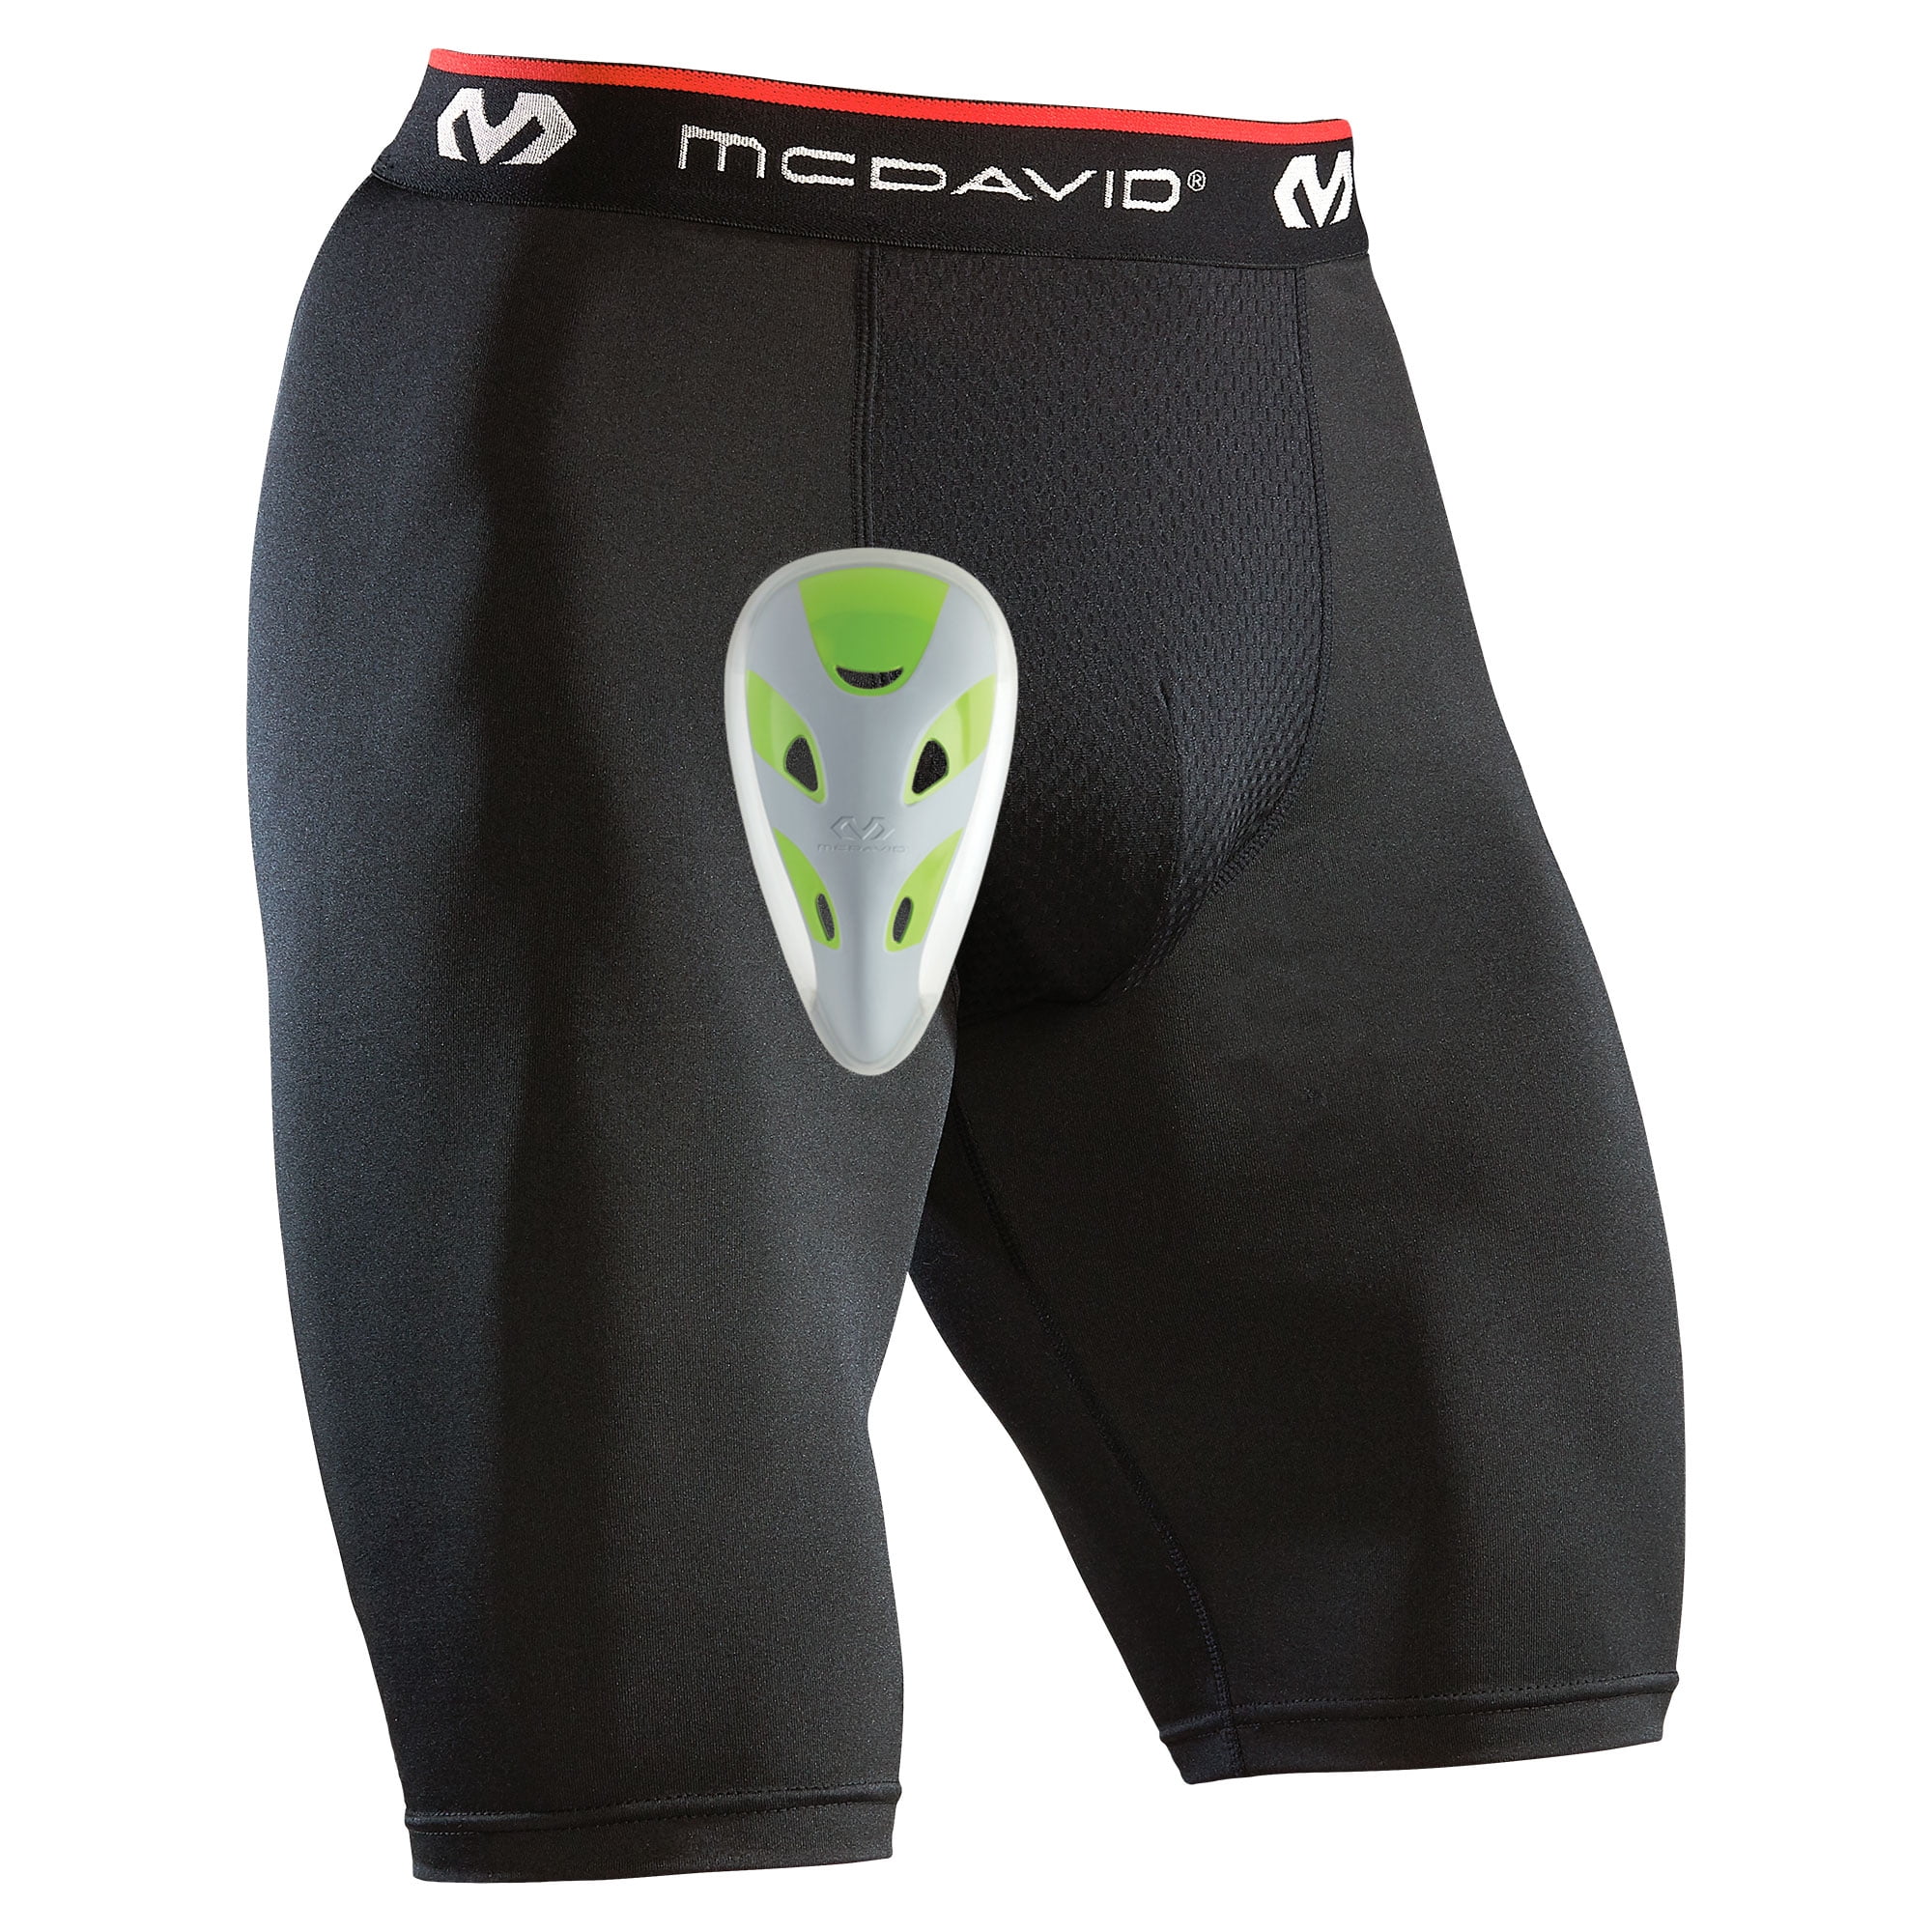 Free Shipping! Teen Large McDavid Double Layer Compression Short w/ FlexCup 